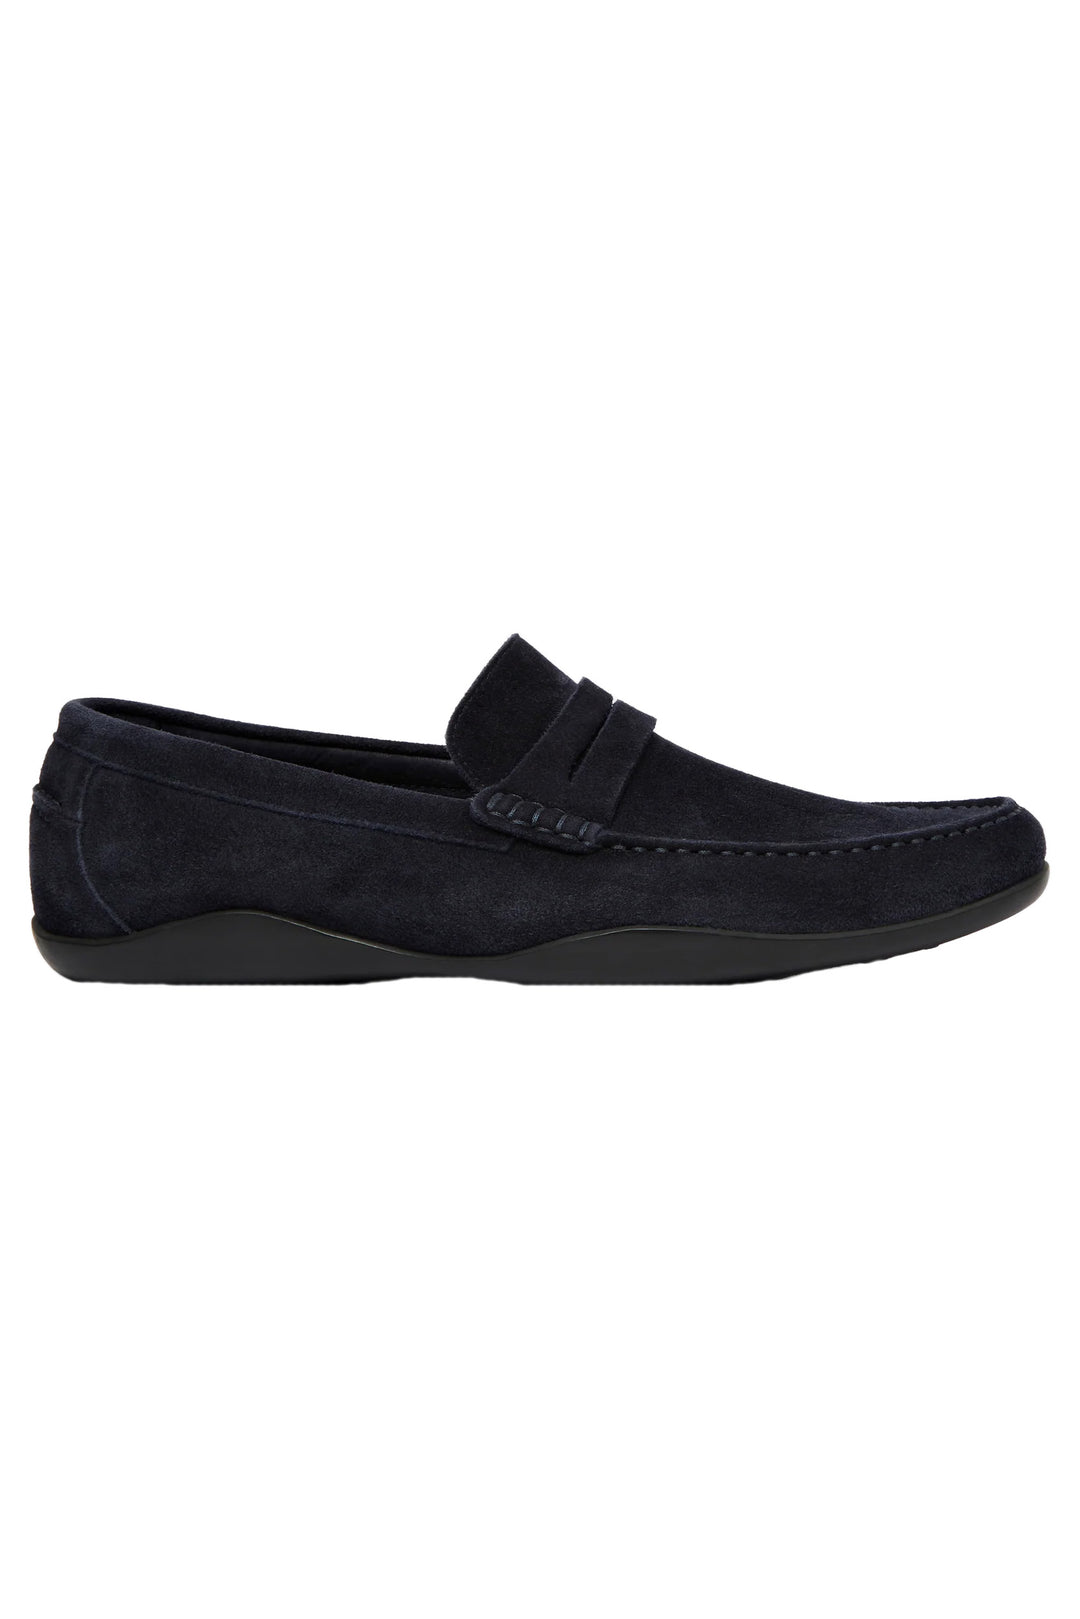 Harry's of London Basel Kudu Suede Loafer in Midnight